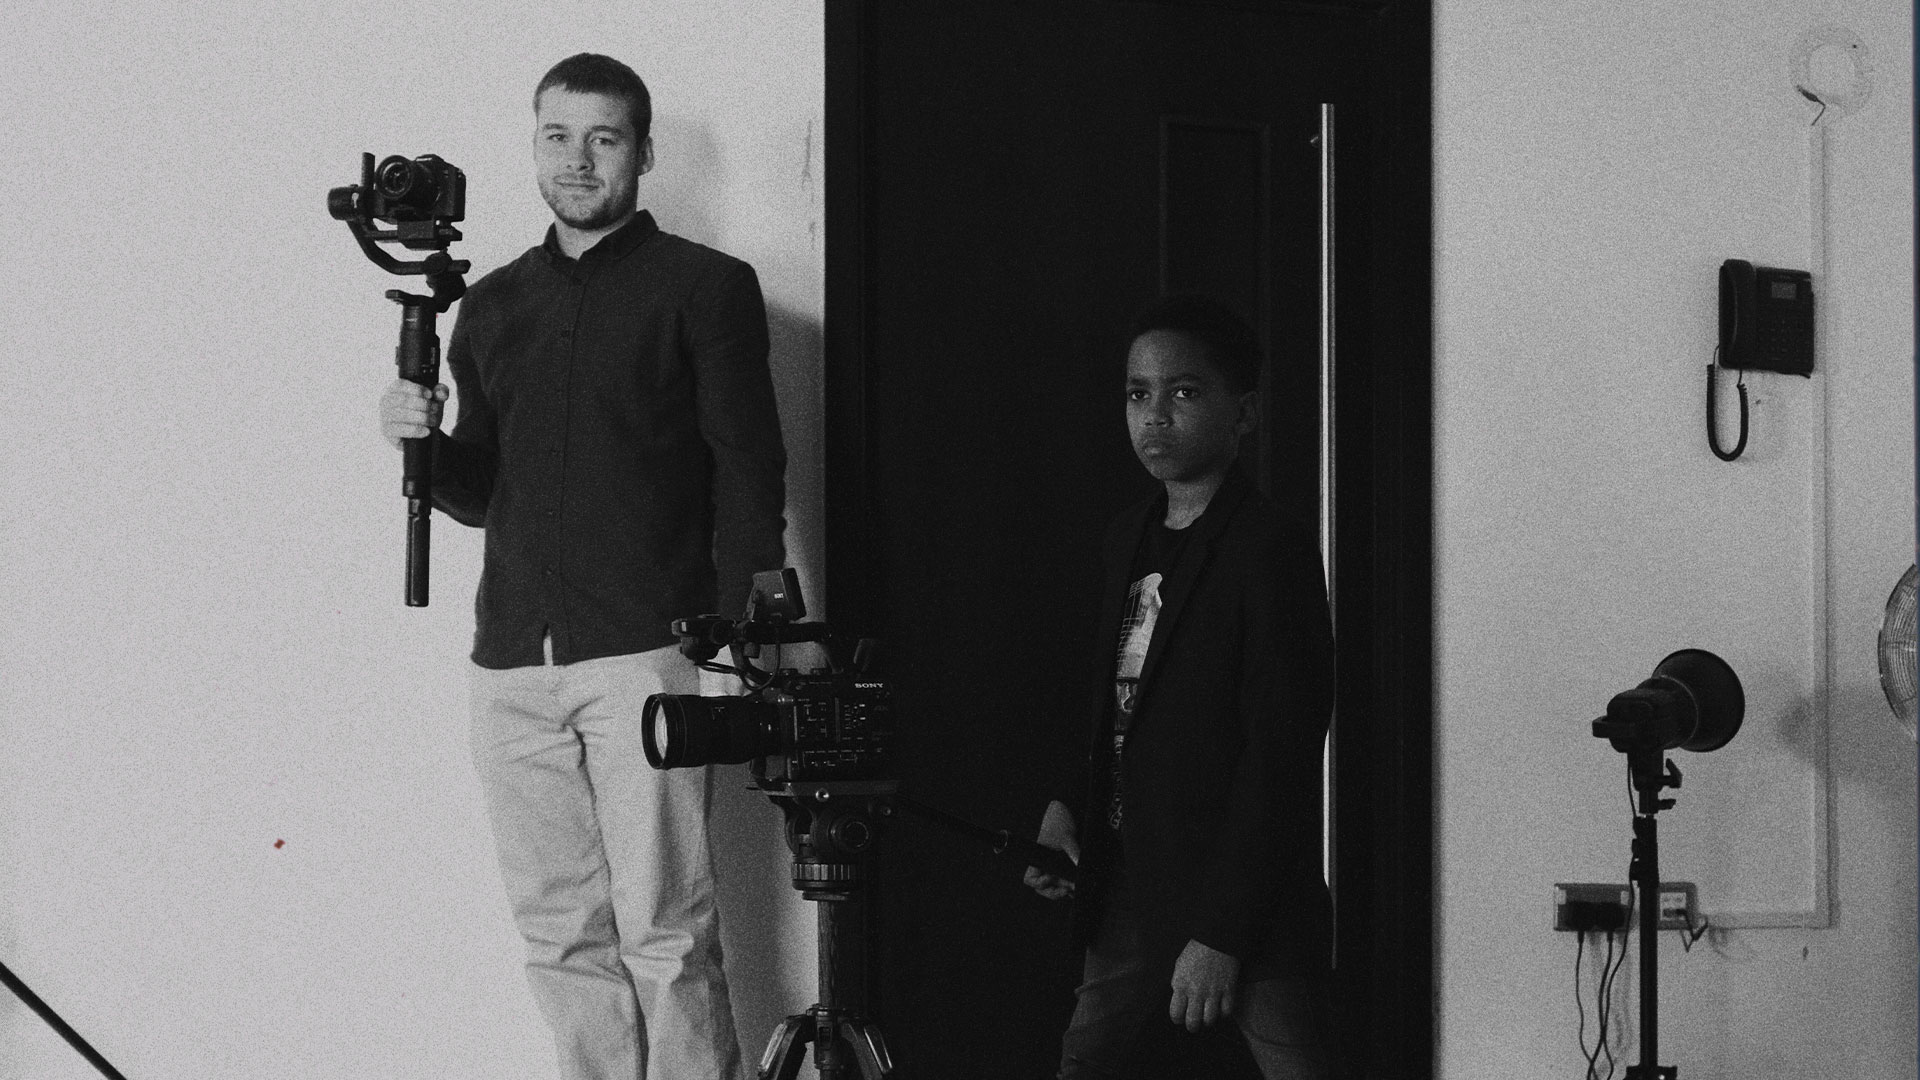 A film maker stands with a camera. Beside him is a young person with a camera on a tripod. The film maker is smiling at the camera while the young person is focused on filming something off screen